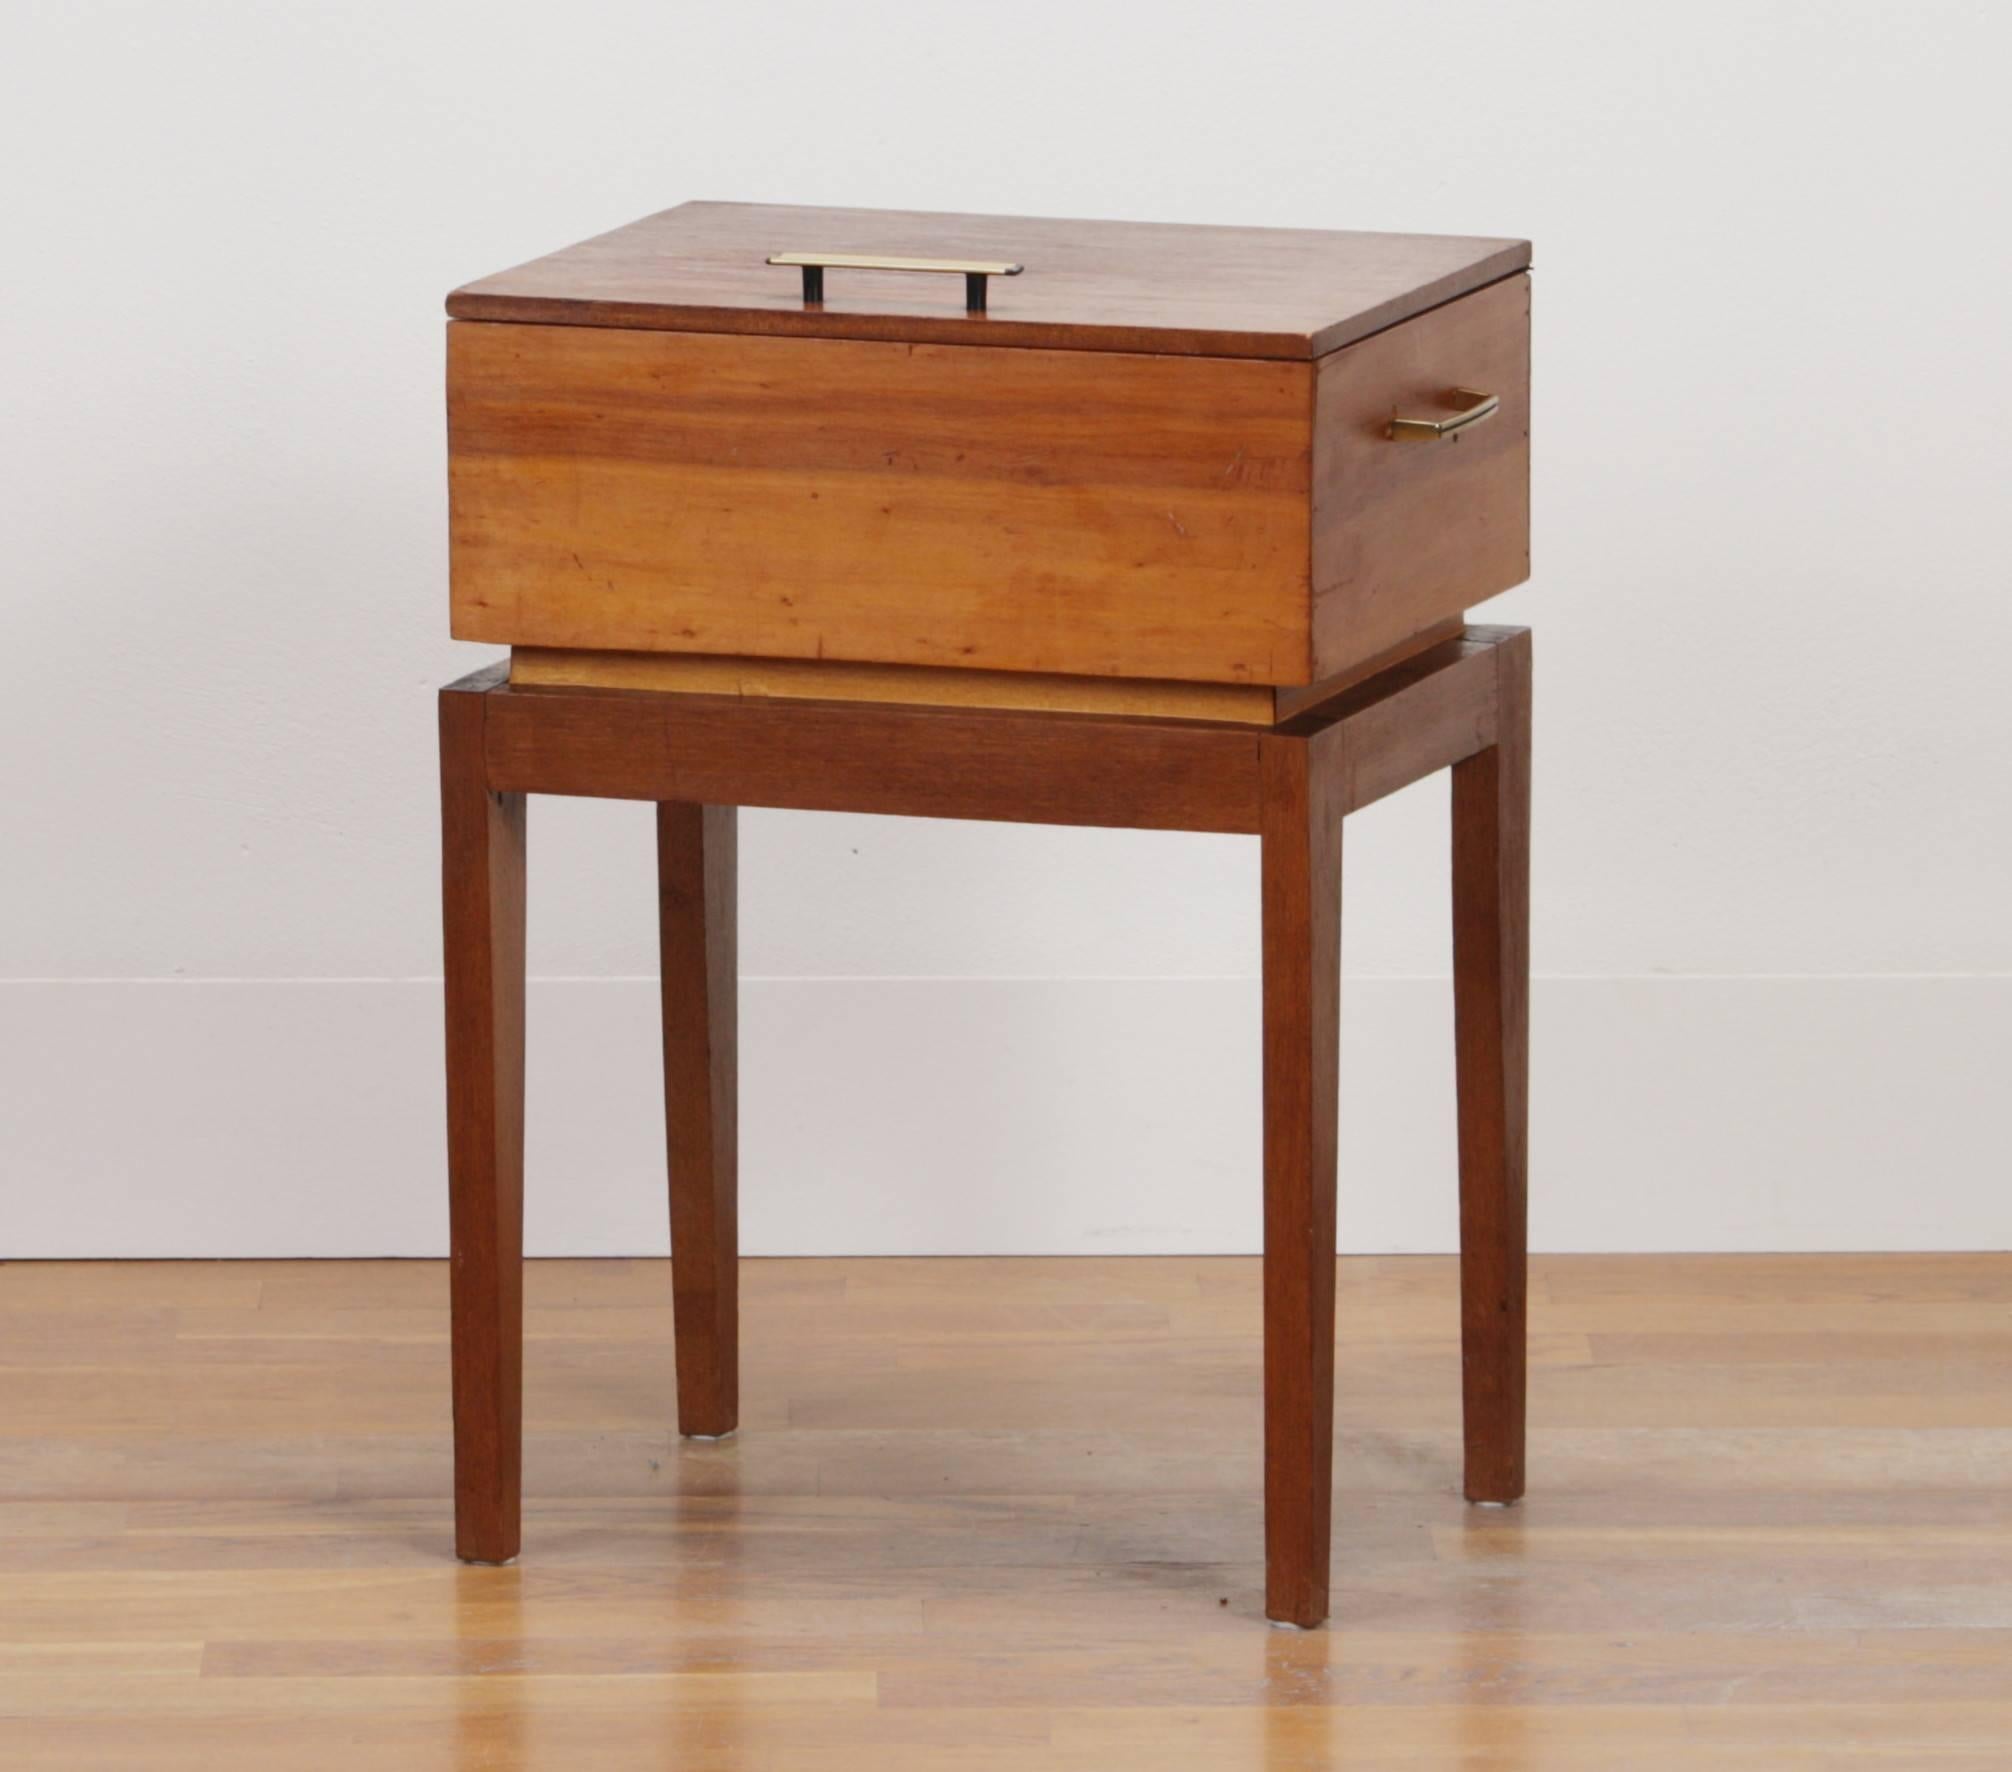 Beautiful sewing, side table.
This side table with storage is made from teak and pine and is in excellent vintage condition.
Period 1950s
Dimensions: H 56 cm, W 40 cm, D 32 cm.